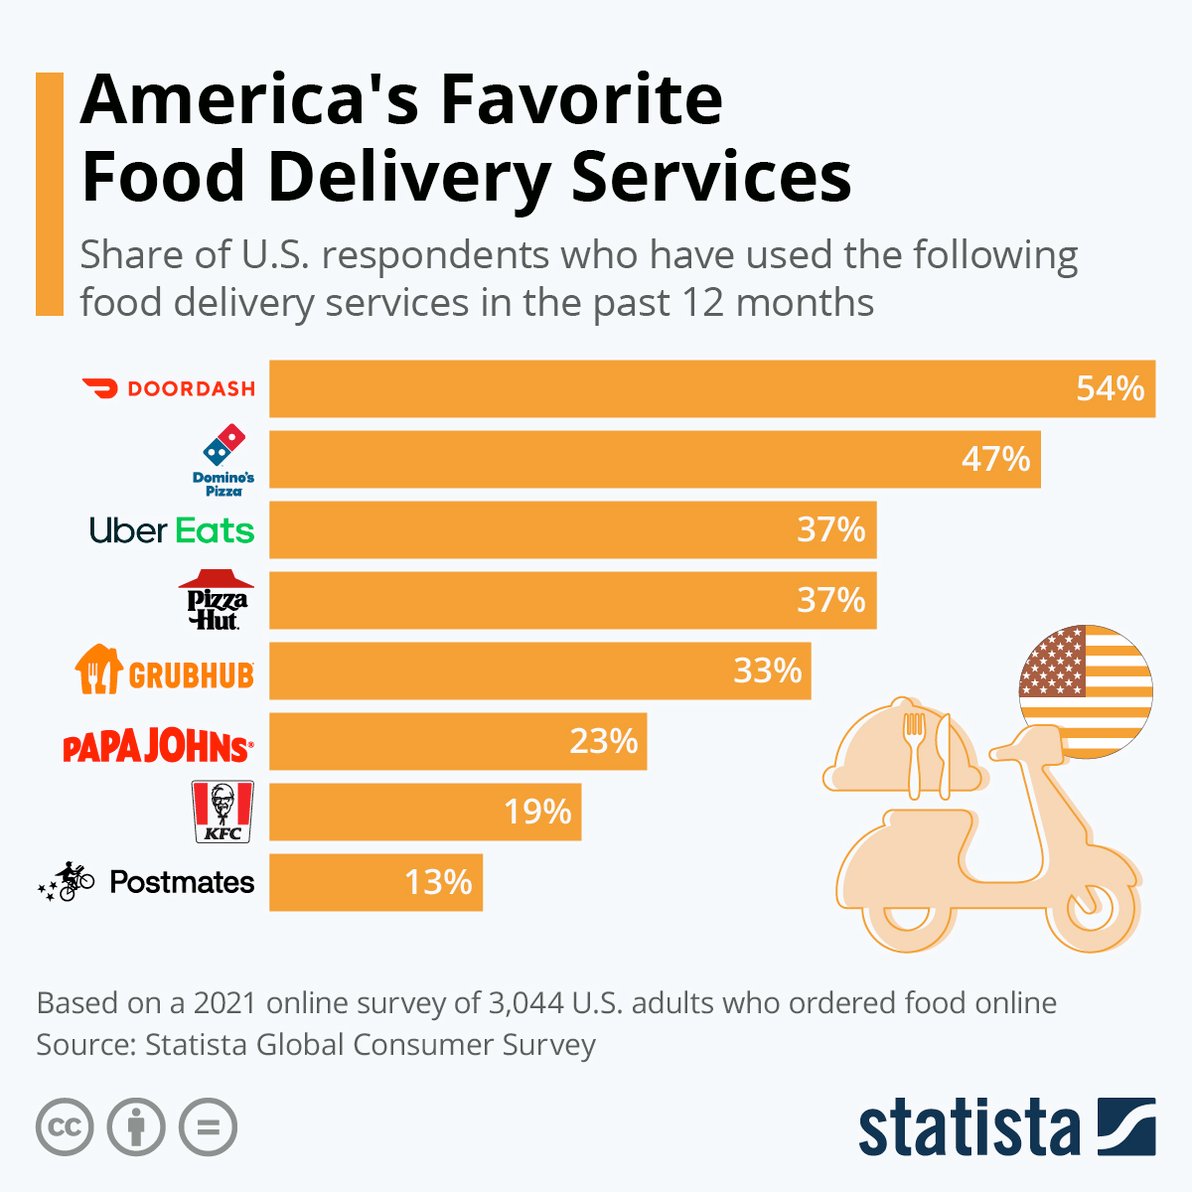 America's Favorite Food Delivery Sources